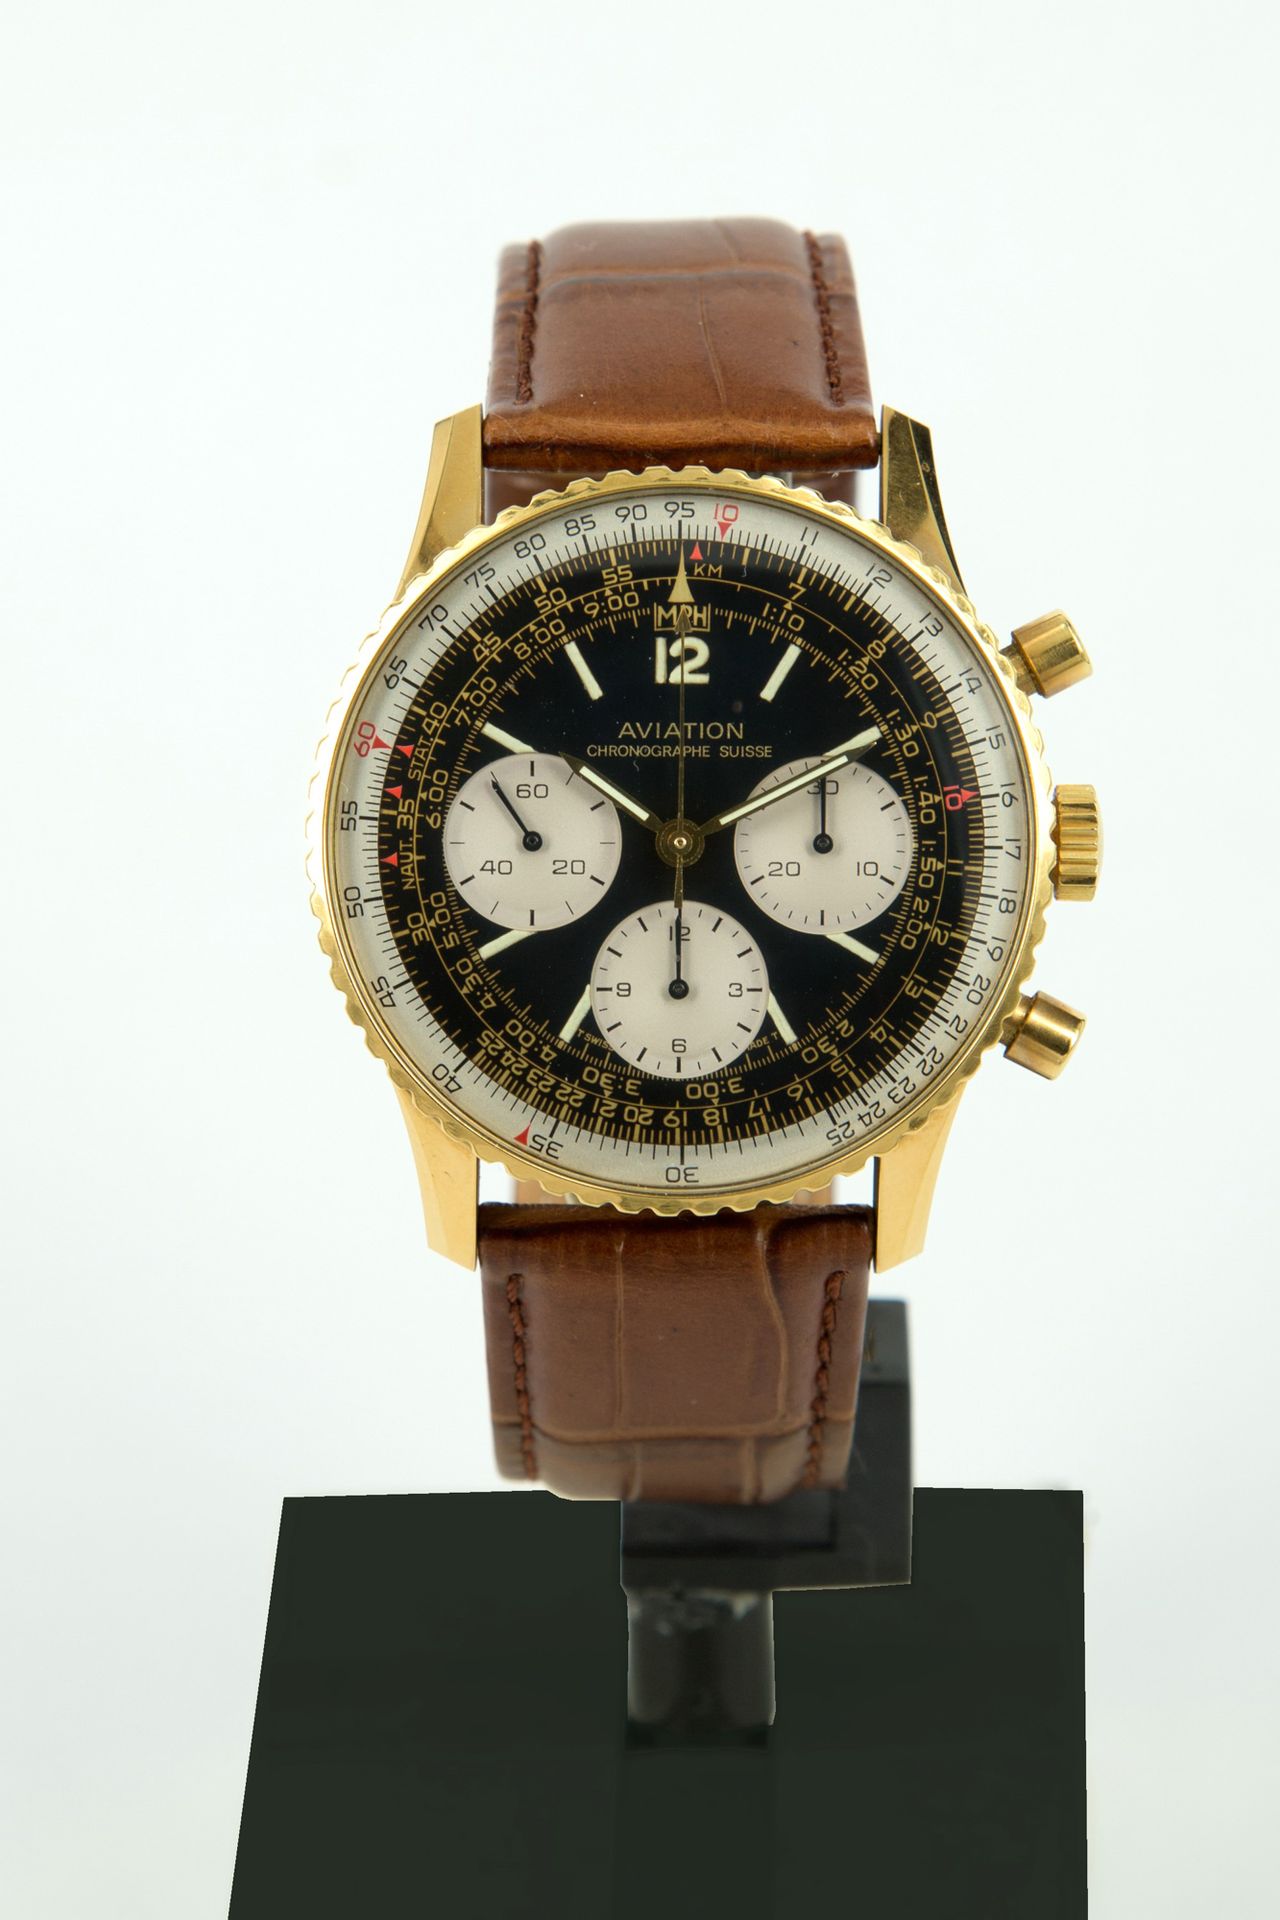 AVIATION Chronographe Suisse gold and leather Automatikuhr Chronographe Suisse a&hellip;